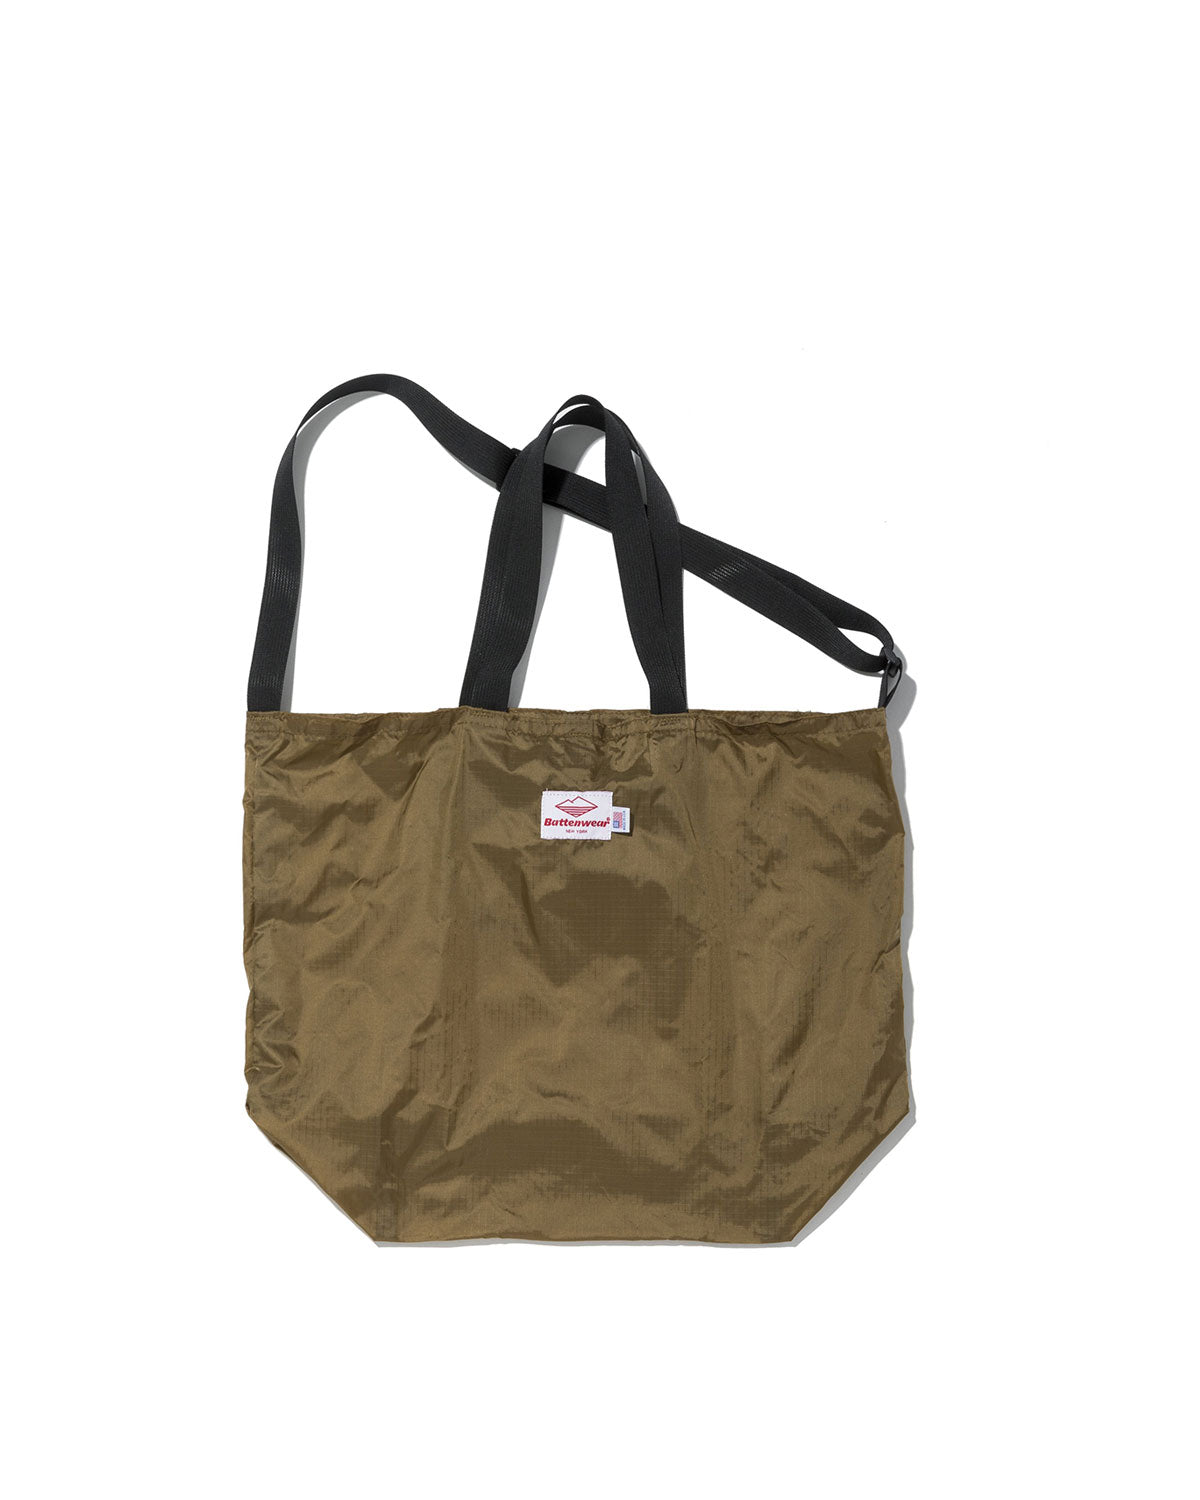 Bags: Totes and Backpacks by Battenwear